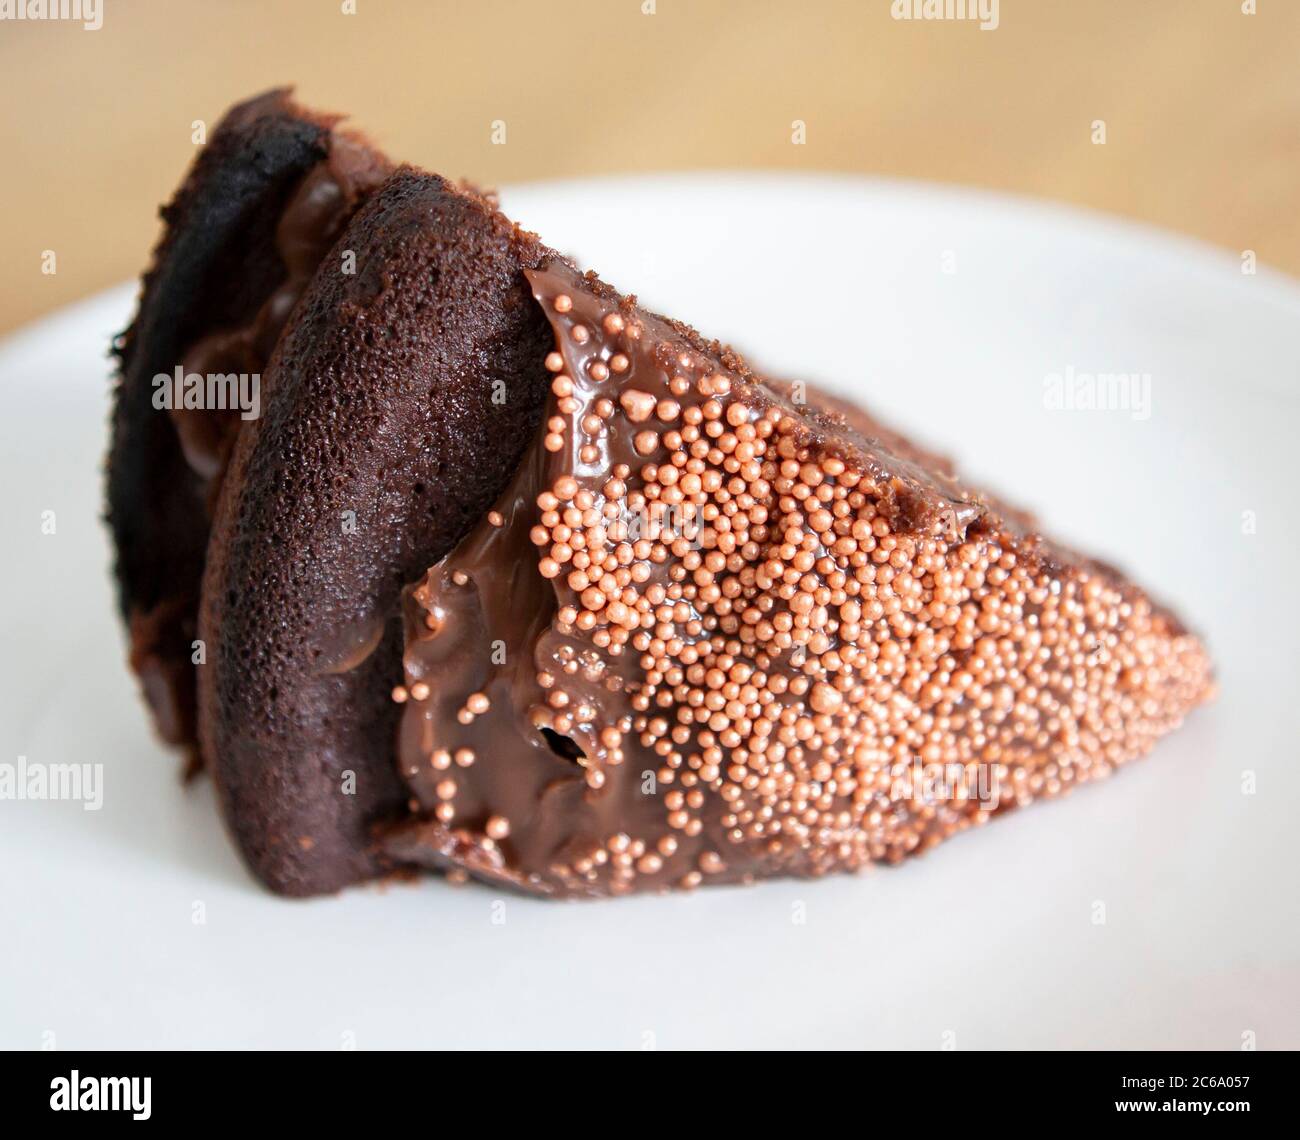 Chocolate cake with rose gold sprinkles Stock Photo